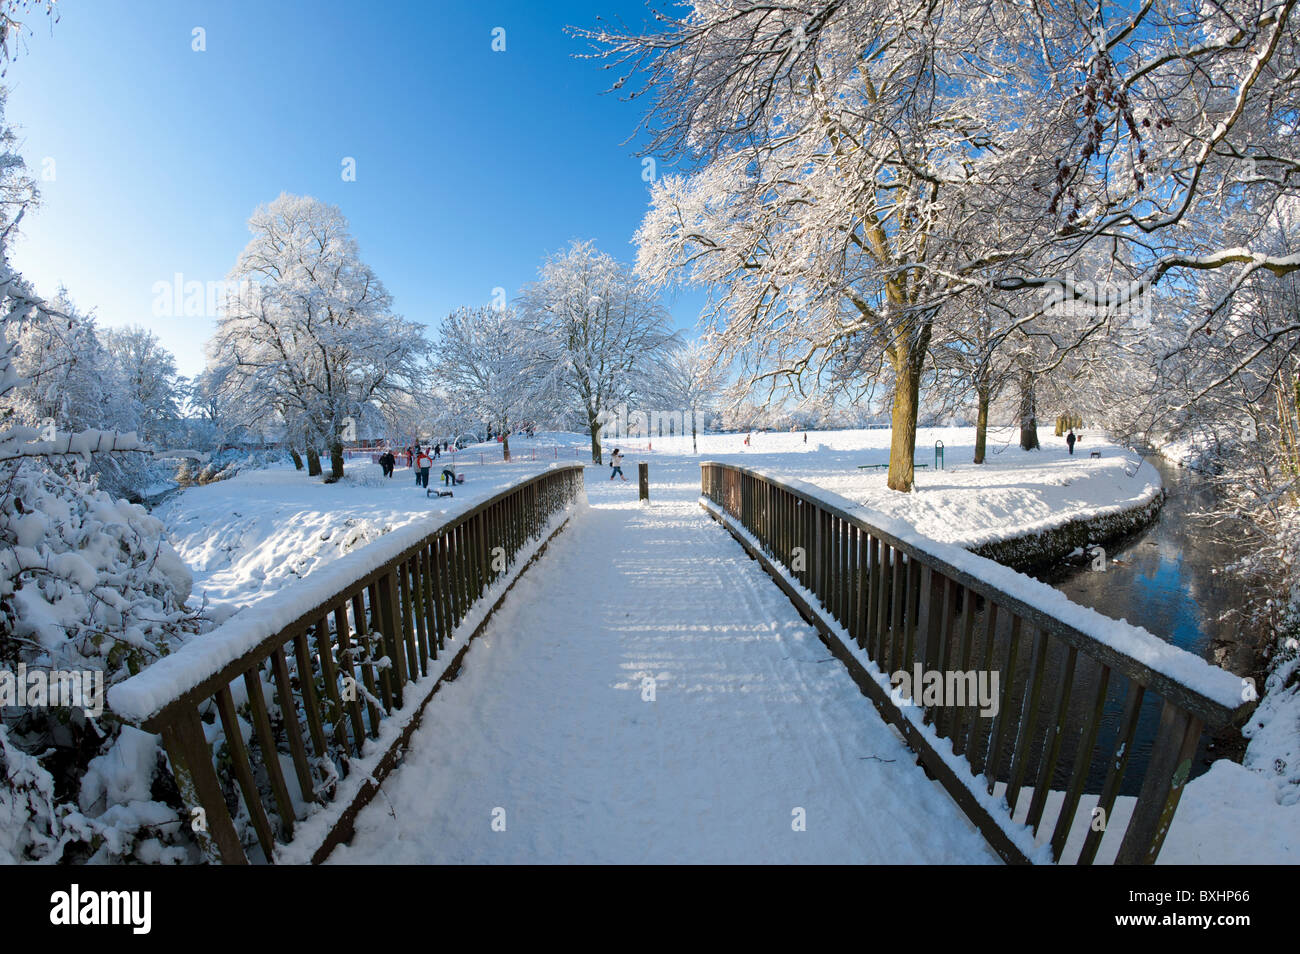 Winter snow scene in park land with trees, people and bridge Stock Photo